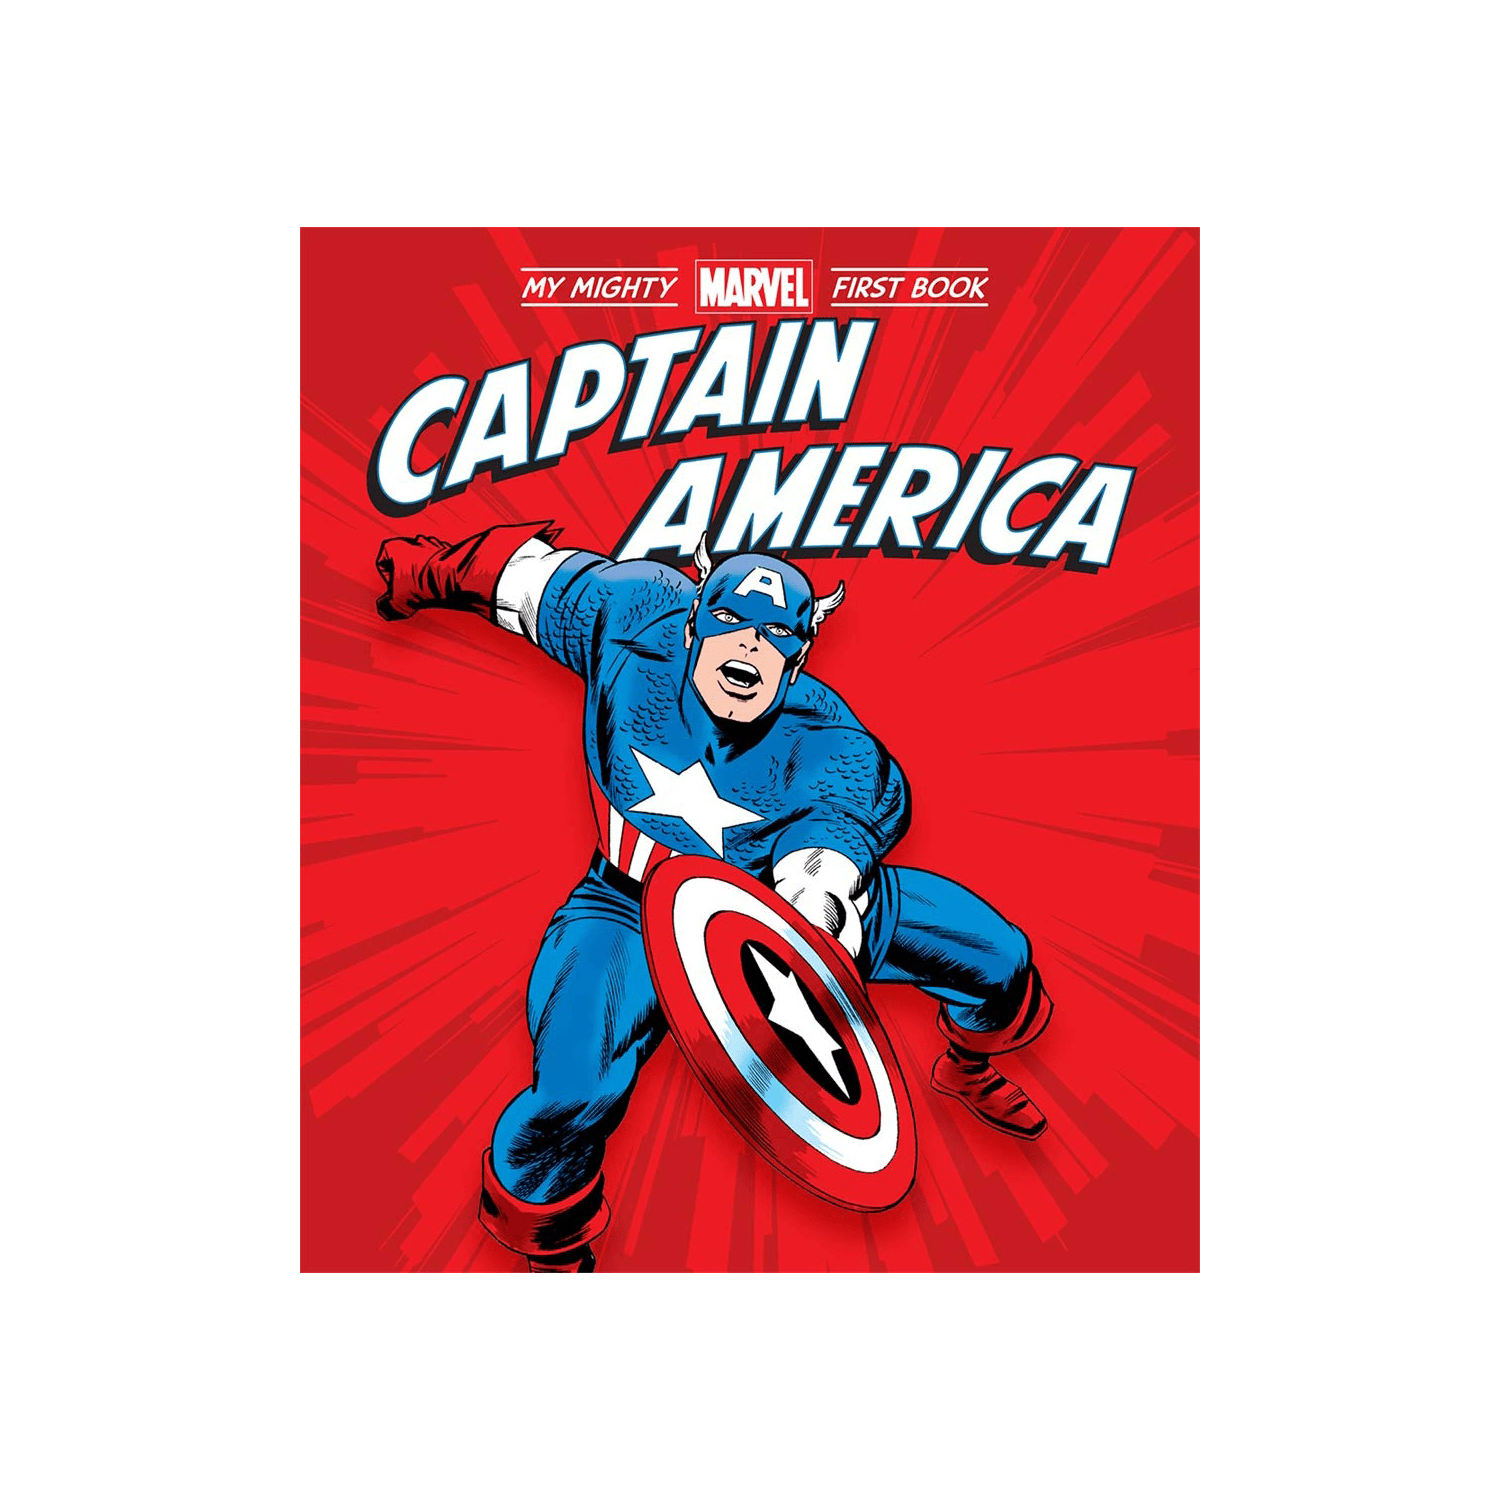 my-might-marvel-first-book-captain-america